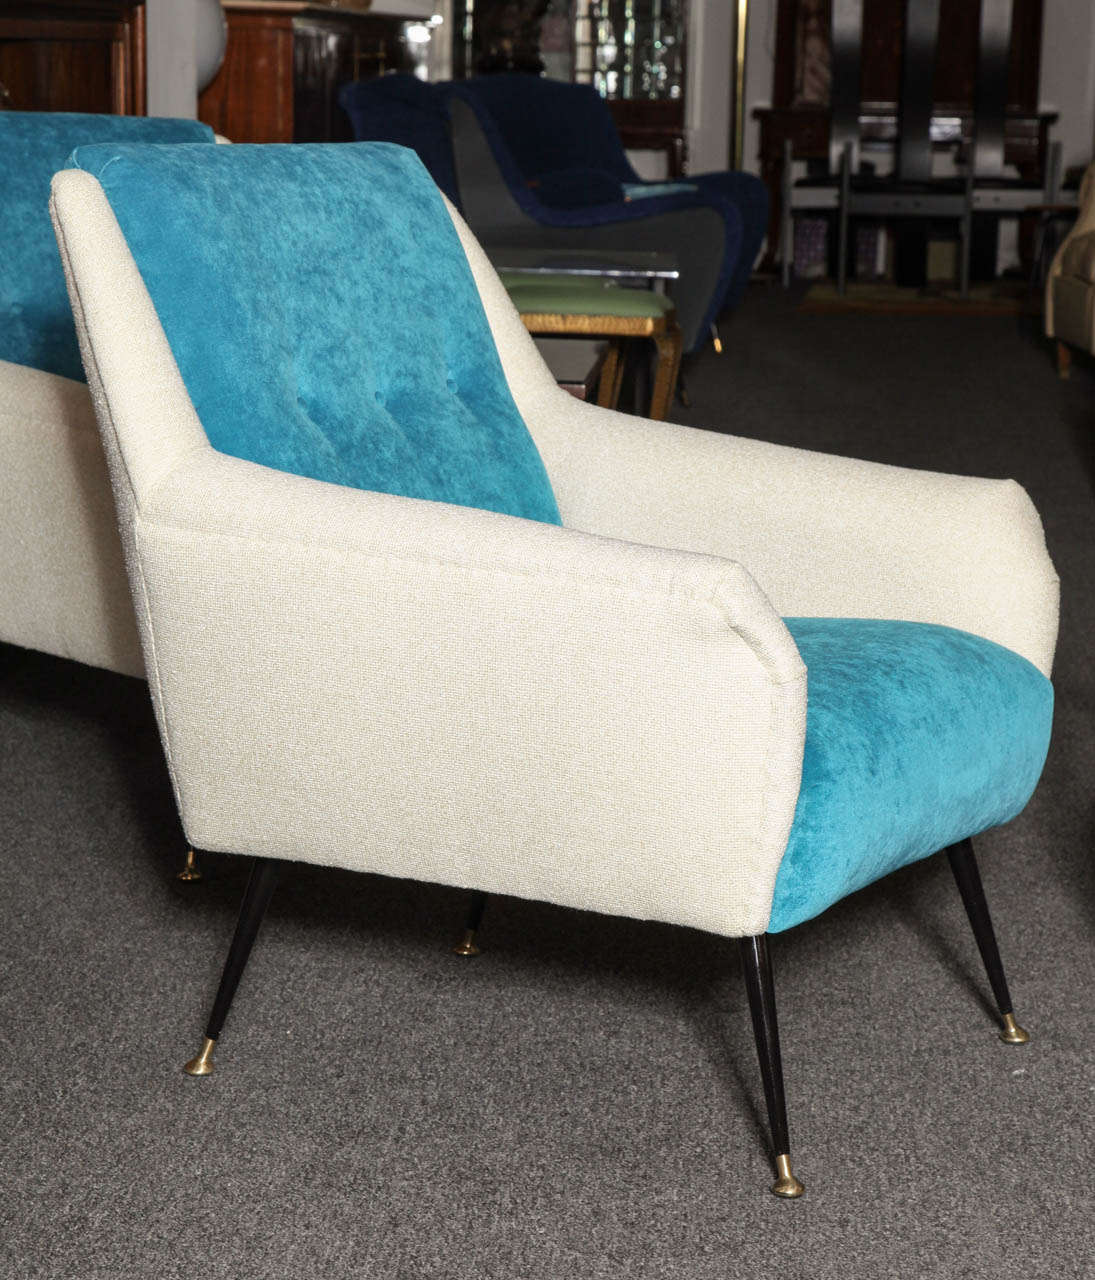 Hand-Crafted Pair of Armchairs by Gio Ponti Made in Milan, 1955 For Sale